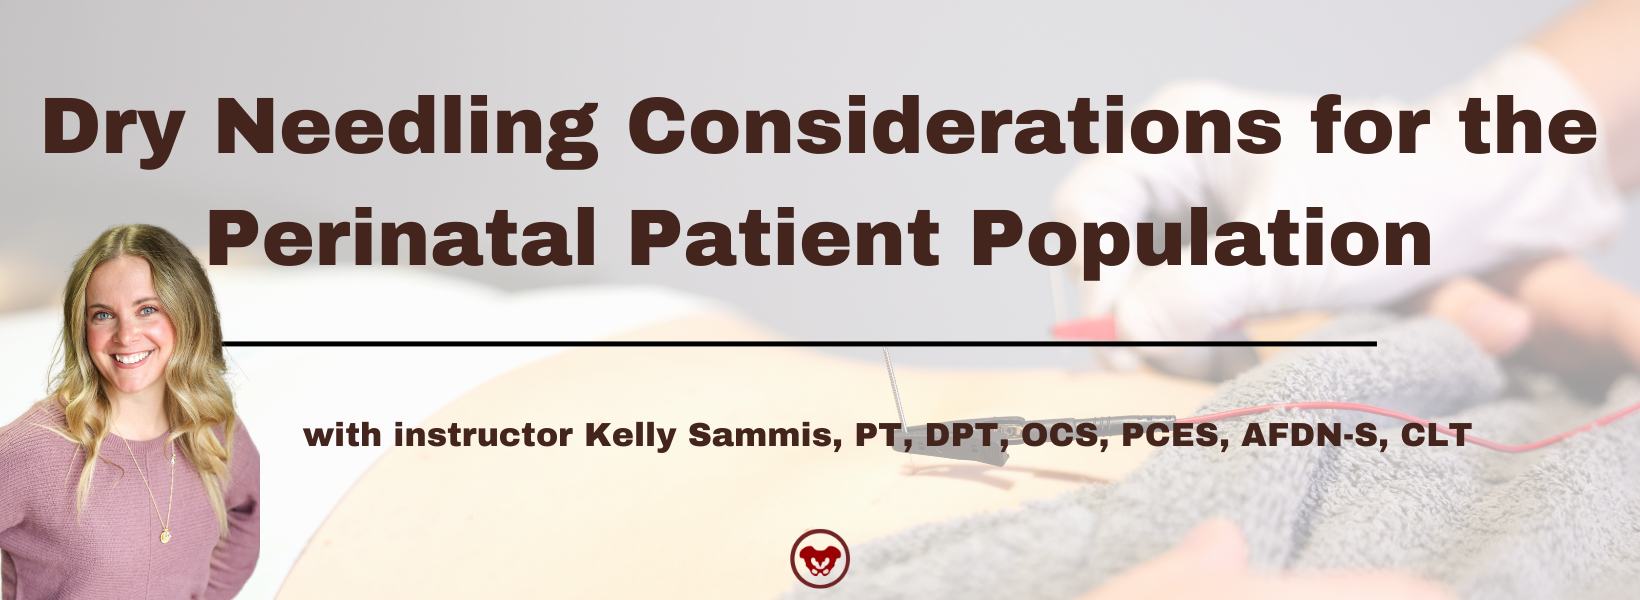 Dry Needling Considerations for the Perinatal Patient Population